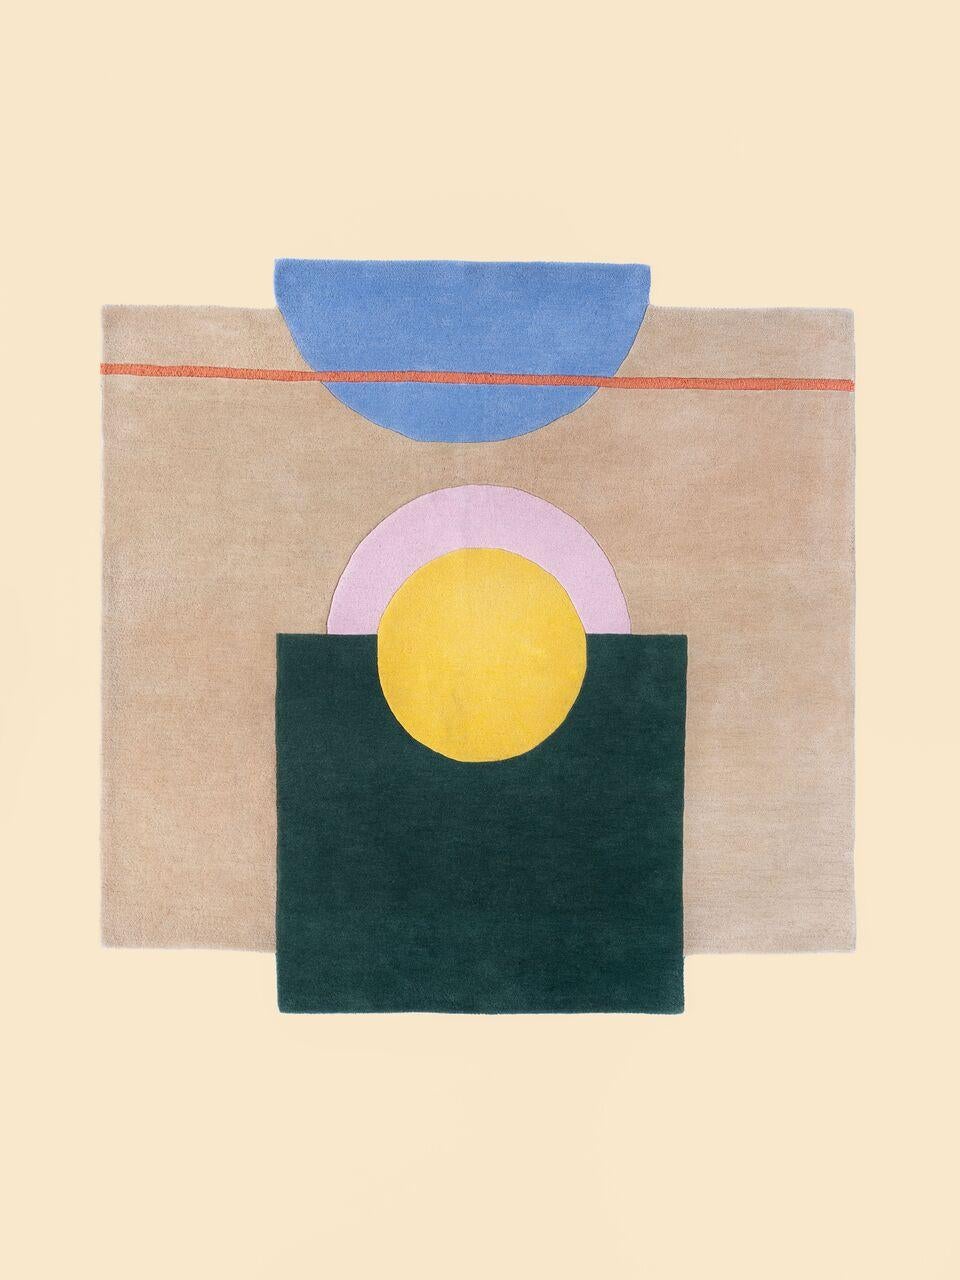 The “Court Series” rugs are hand tufted with blended wool and viscose material dyed in hyper-saturated colors, with tennis court-like geometries represented both via overlaid graphics as well as the cut and shape of individual segments.

Custom